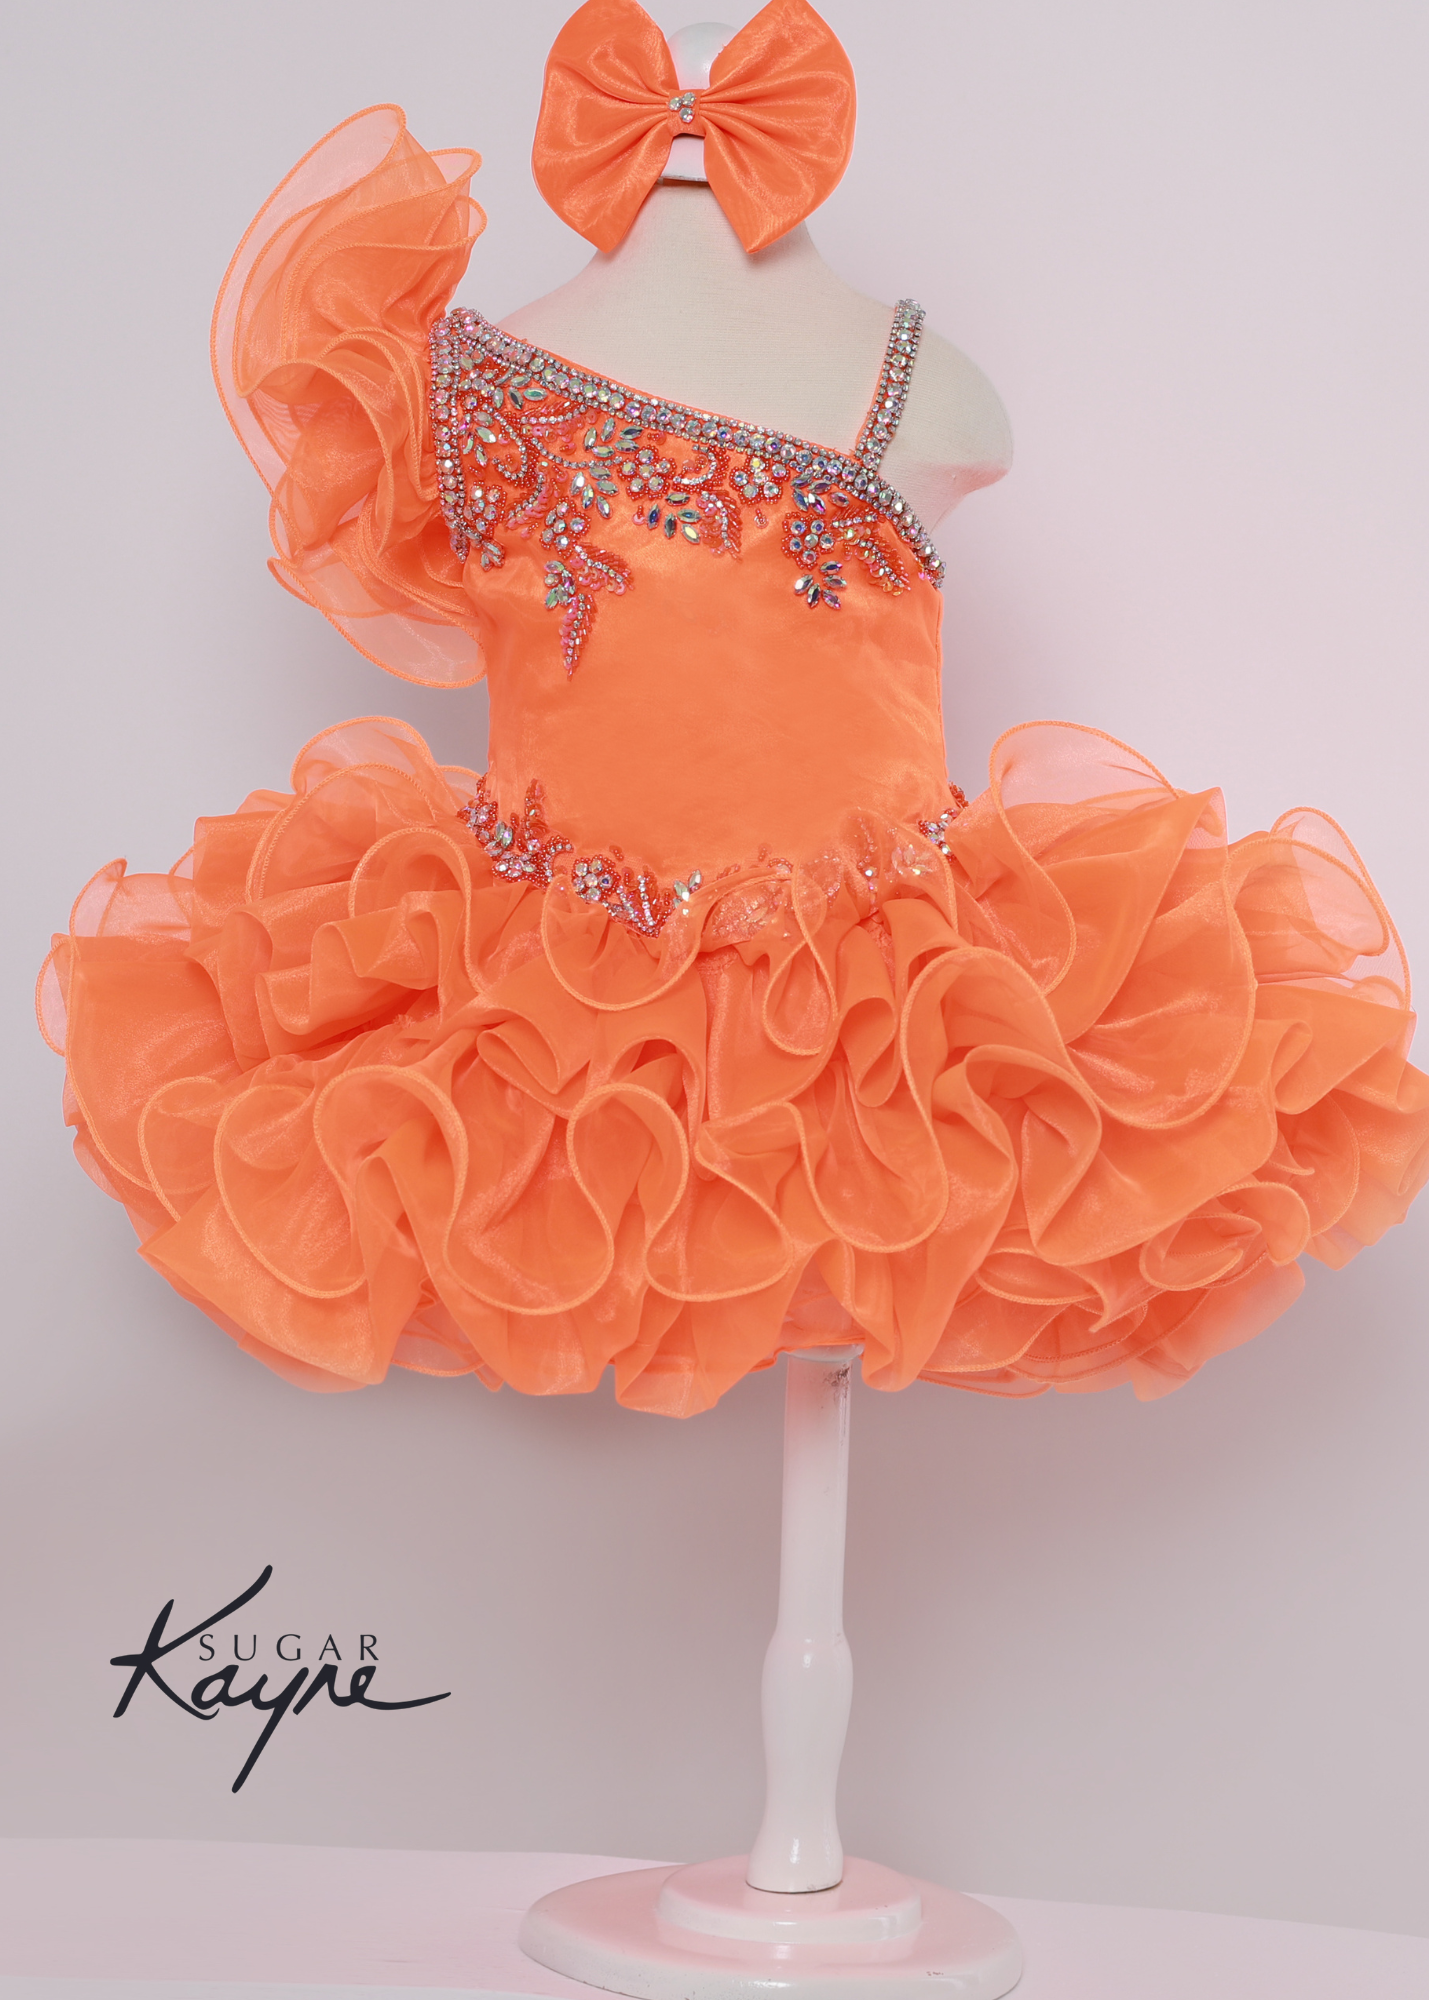 Sugar Kayne C215 Girls Short Cupcake Ruffle One Shoulder Pageant Dress Bow Corset Have your little cupcake bring on all the charm in this stunning organza gown. The corset back is the perfect addition as the little one grows!  Colors: Kiwi, Neon Orange, White  Sizes: 0M, 12M, 18M, 24M, 2T, 3T, 4T, 5T, 6M, 6T  Fabric Organza, Satin Lining